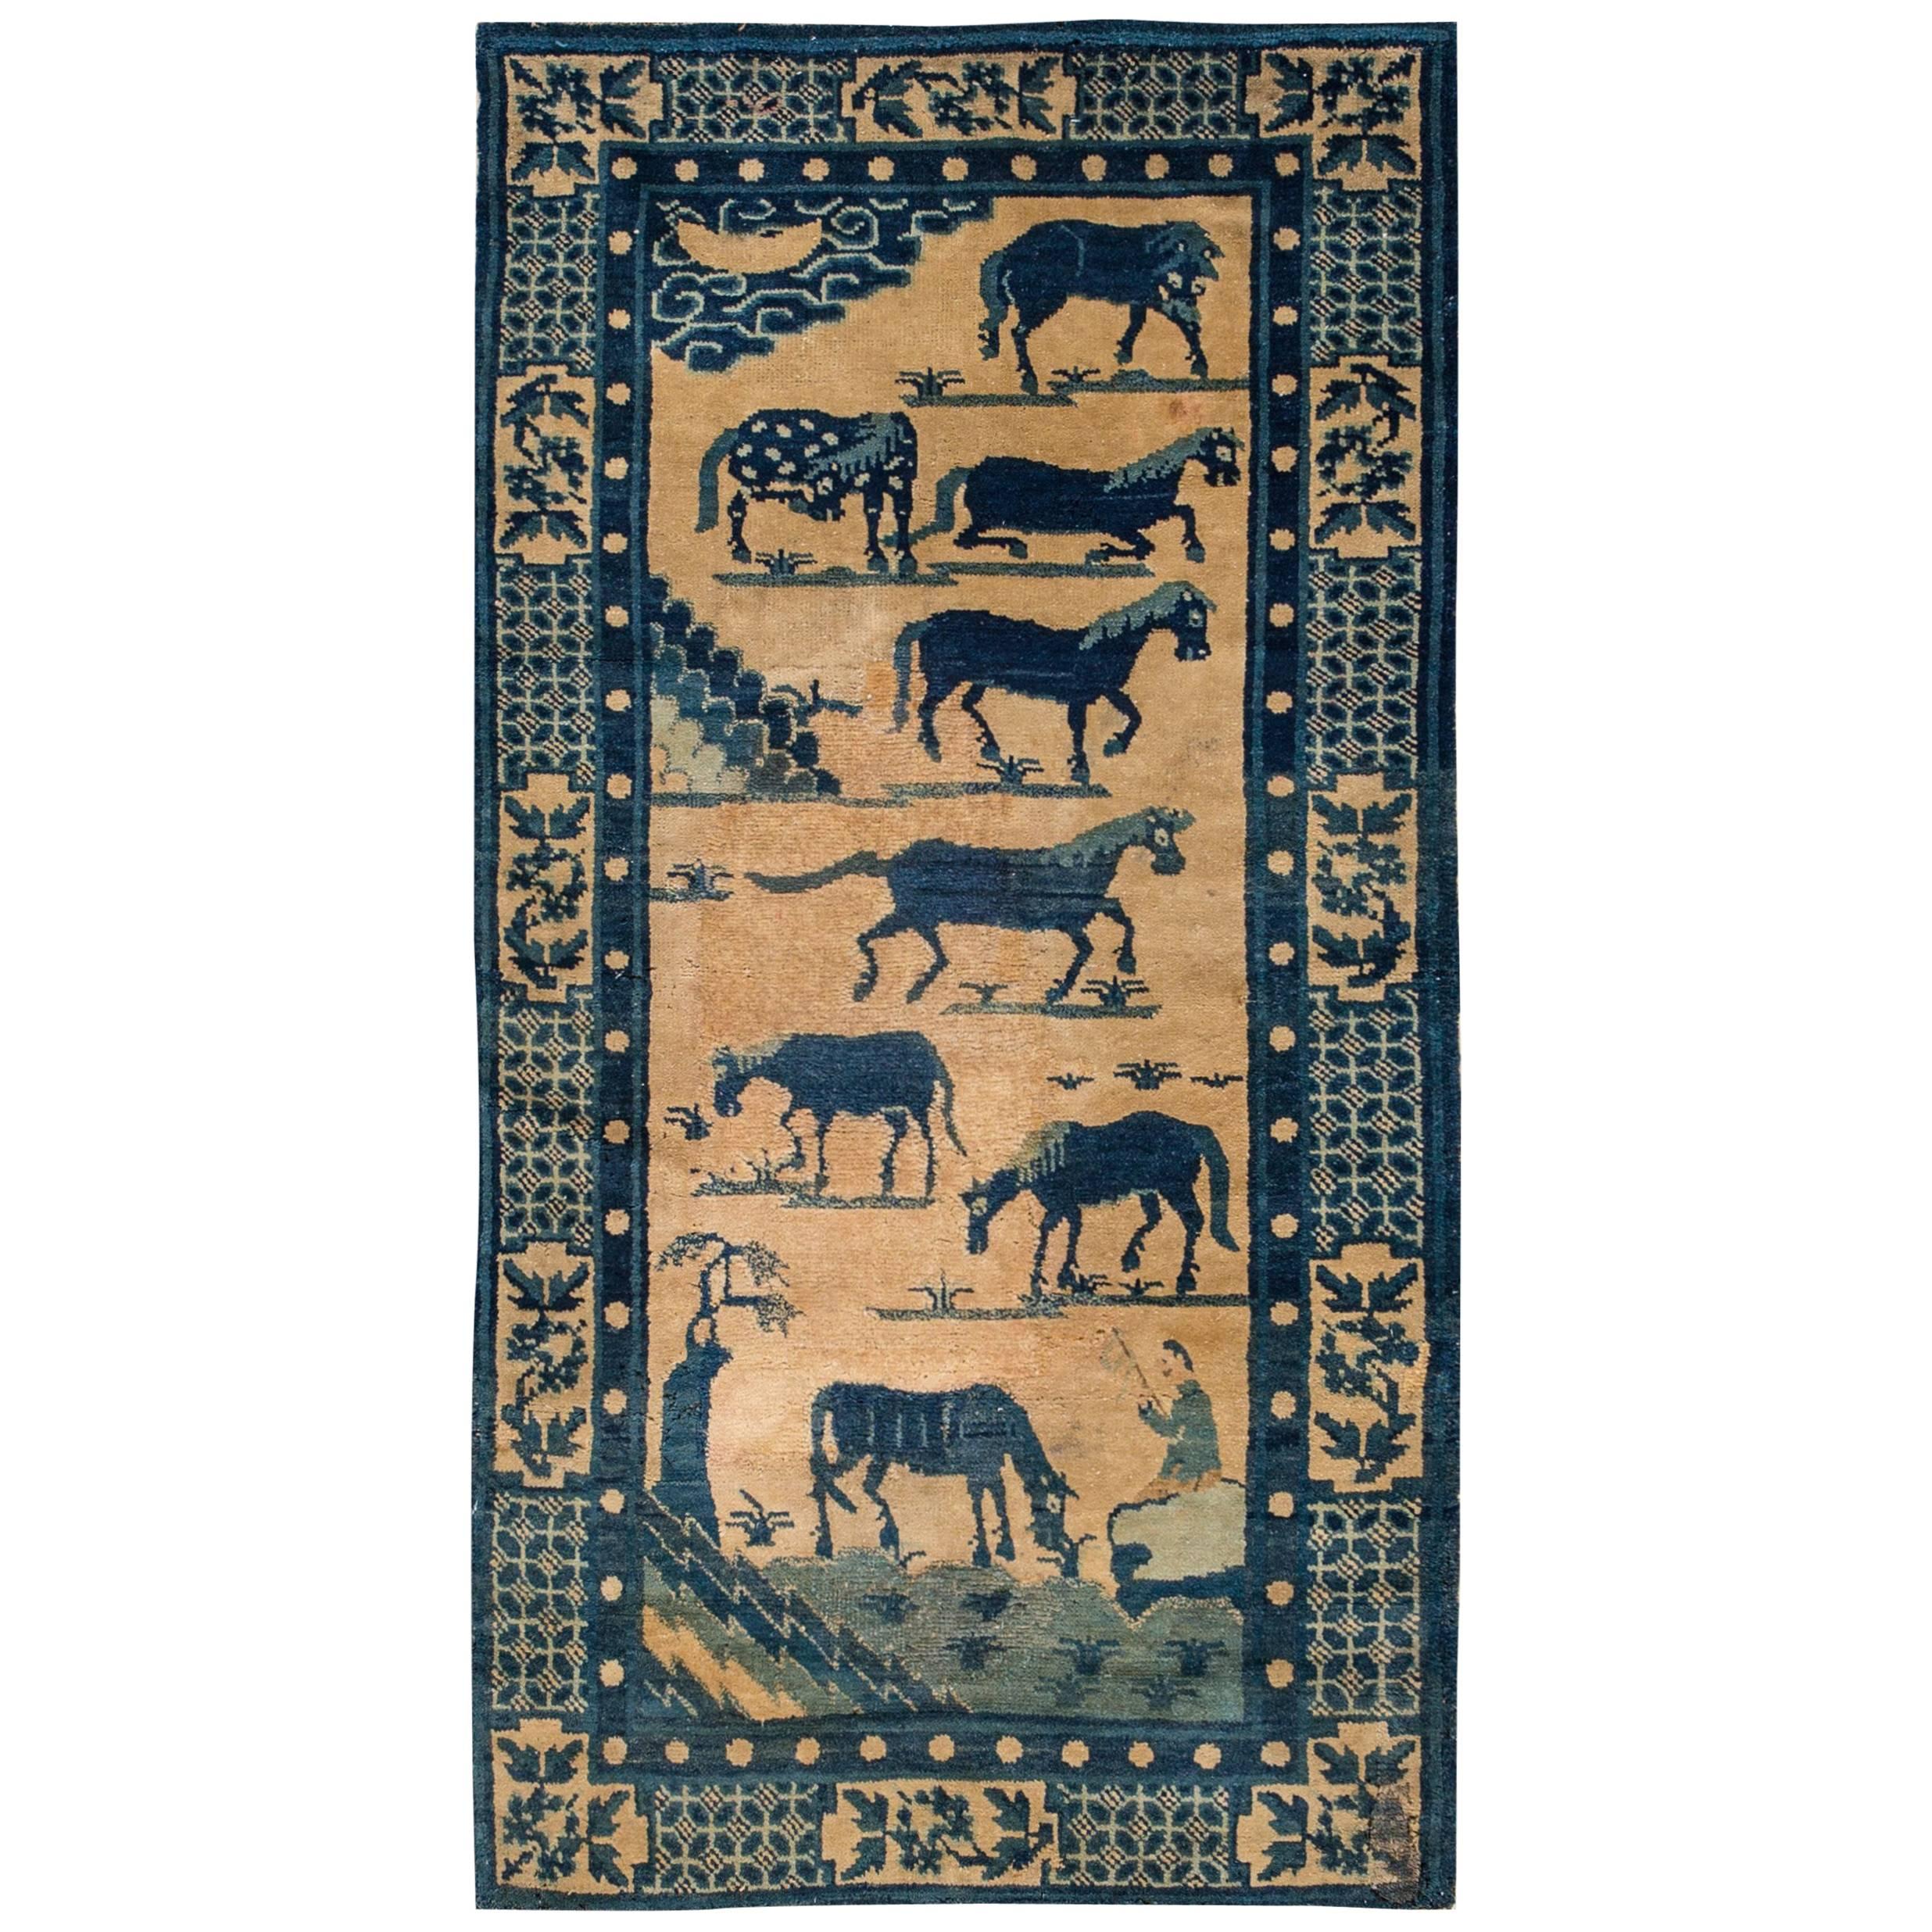 Antique Chinese Pictorial Horse Rug